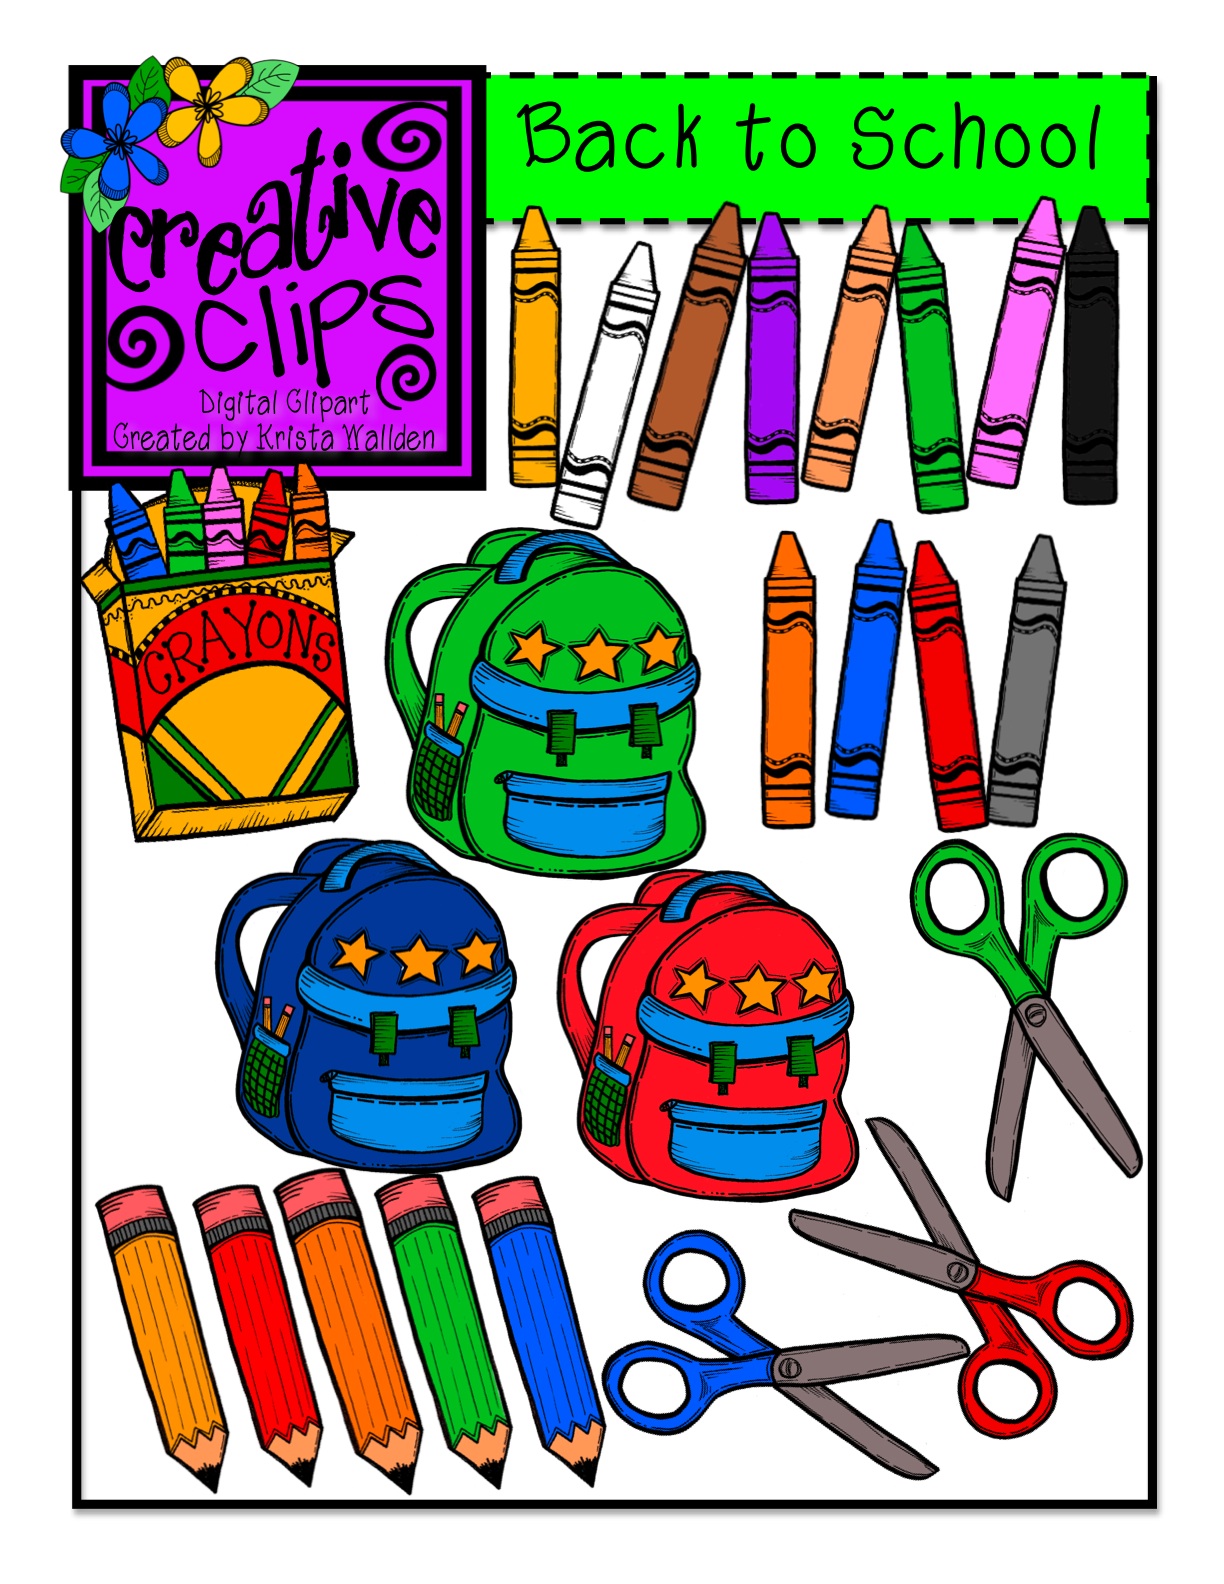 back to school bash clipart - photo #47